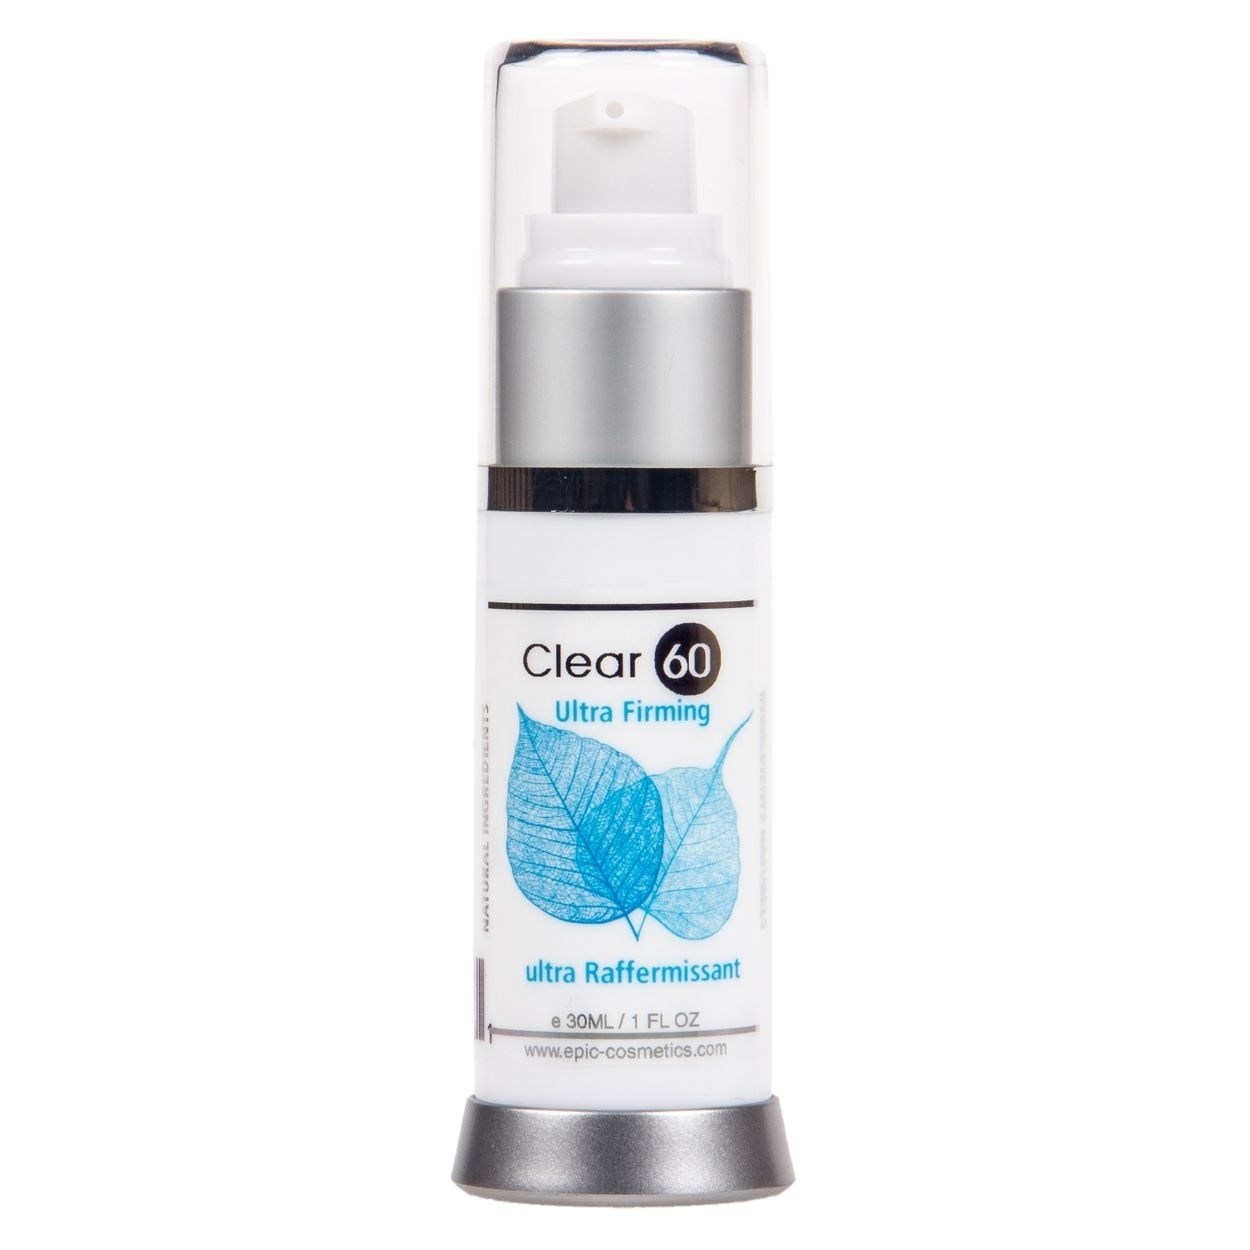 Clear  Ultra Firming 1oz - image 2 of 2